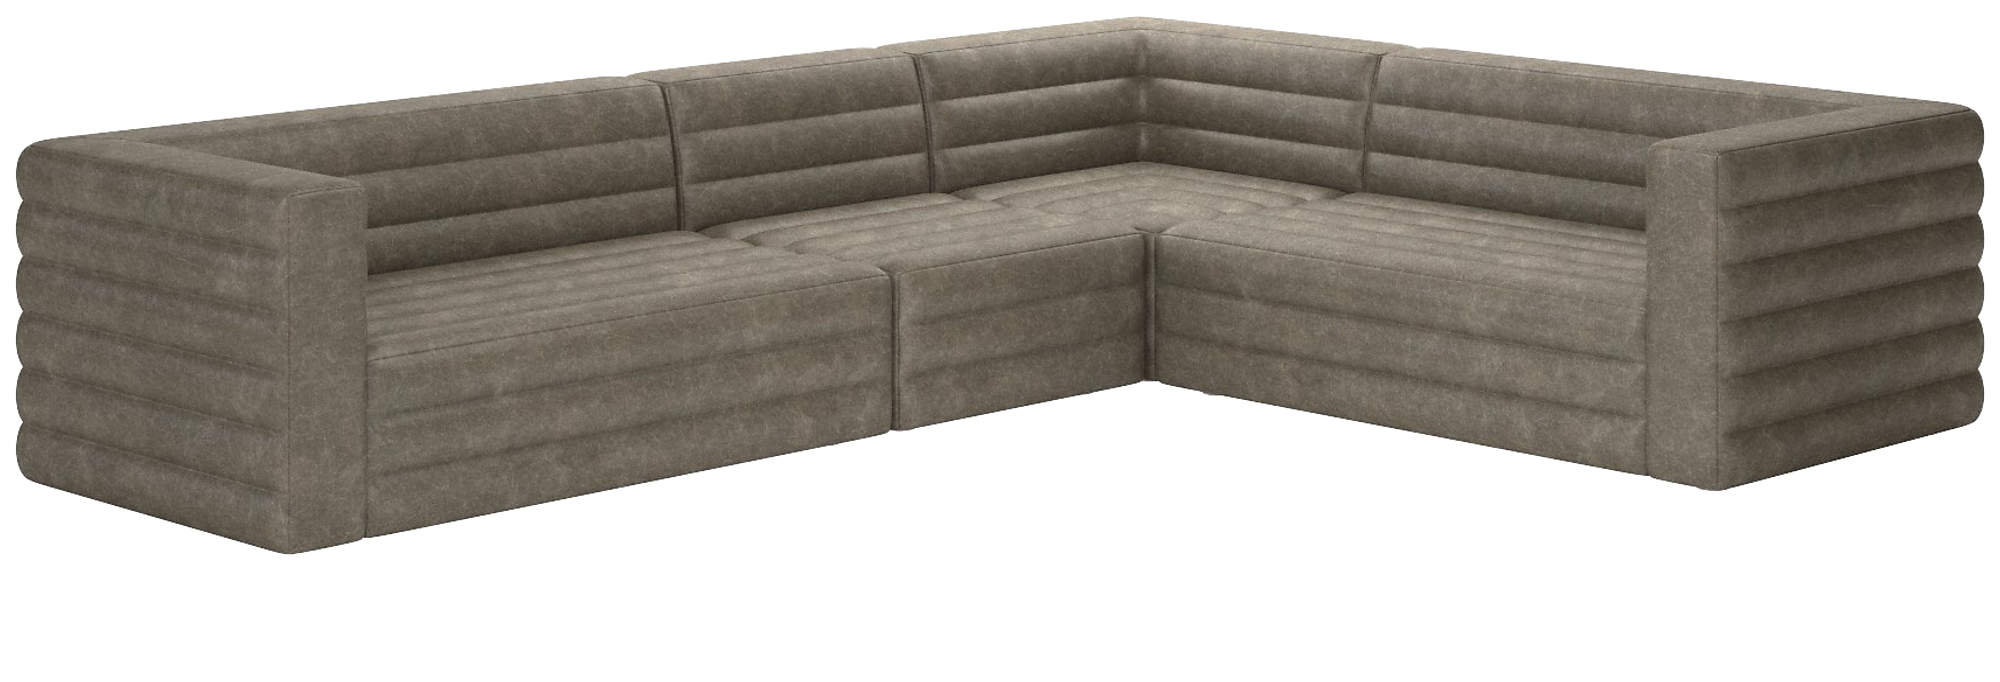 strato 4-piece leather sectional sofa